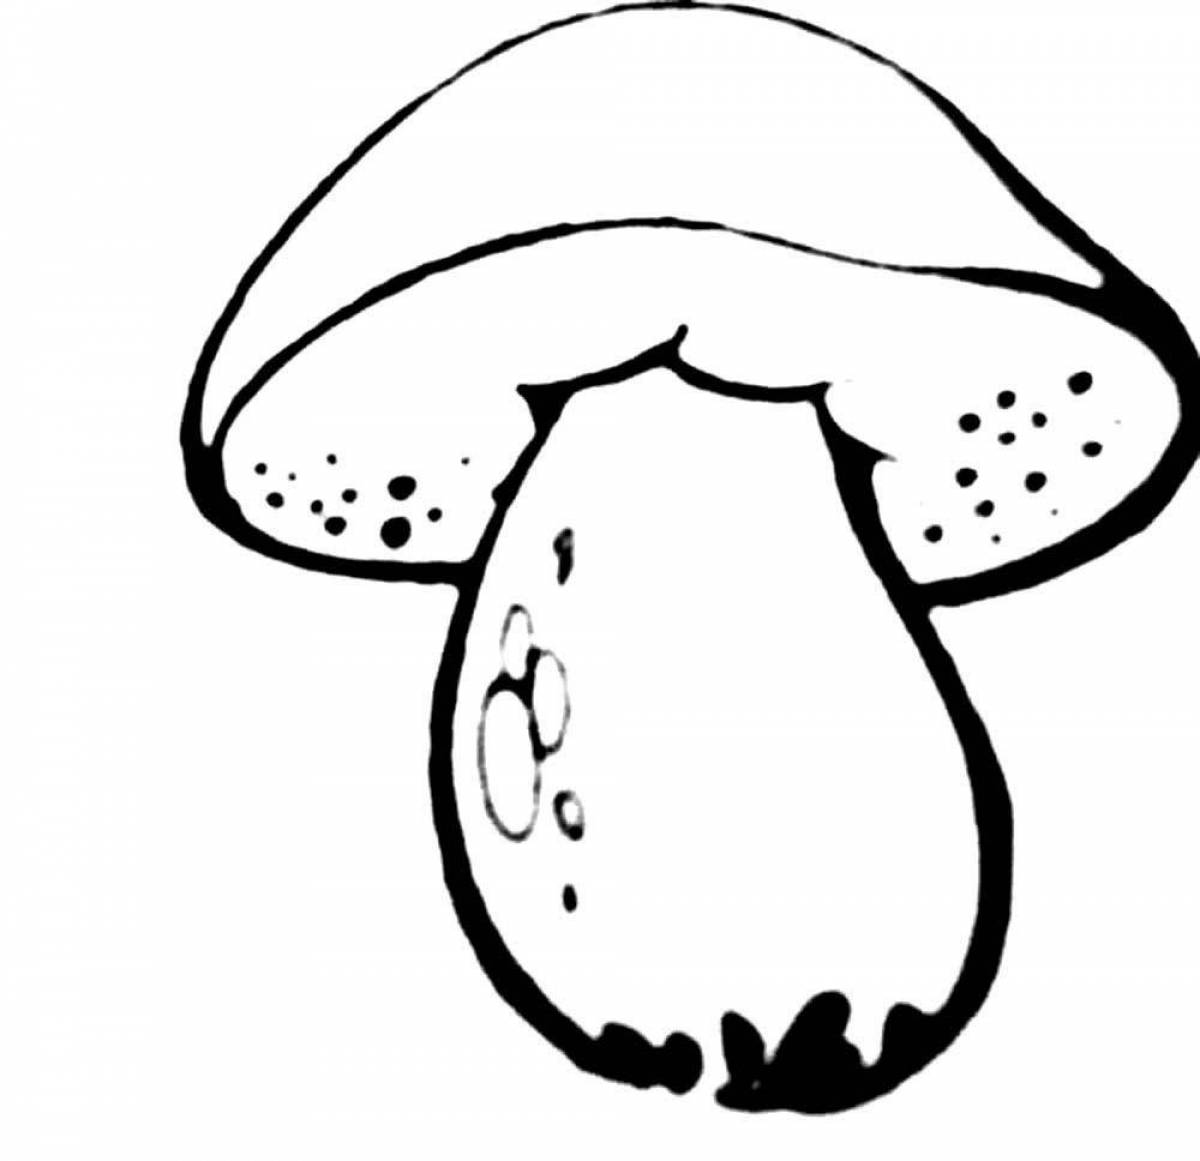 Adorable mushroom coloring page